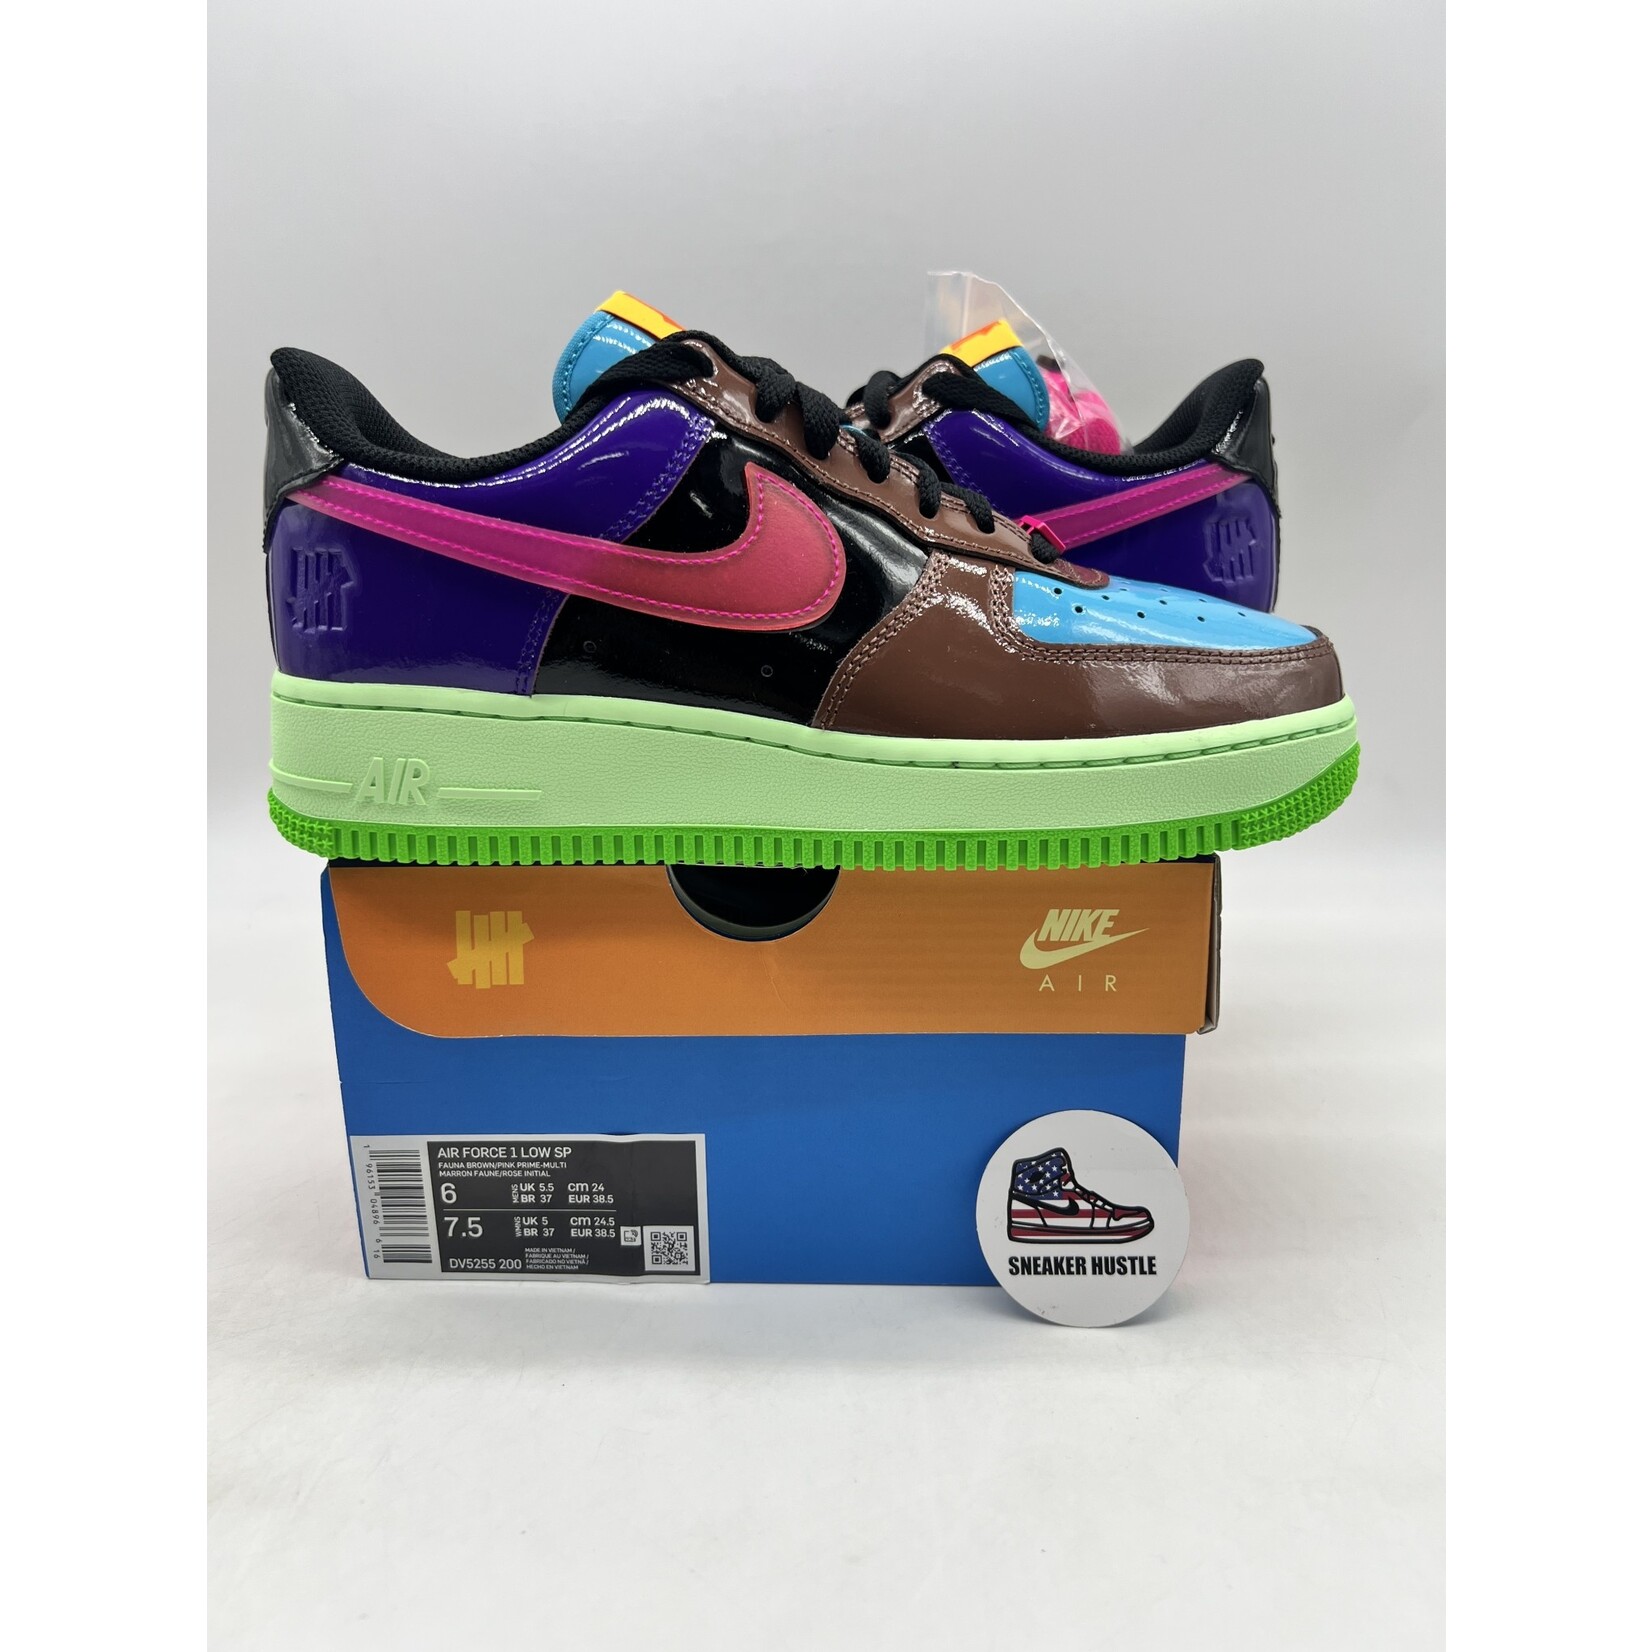 Nike Nike Air Force 1 Low SP Undefeated Multi-Patent Pink Prime